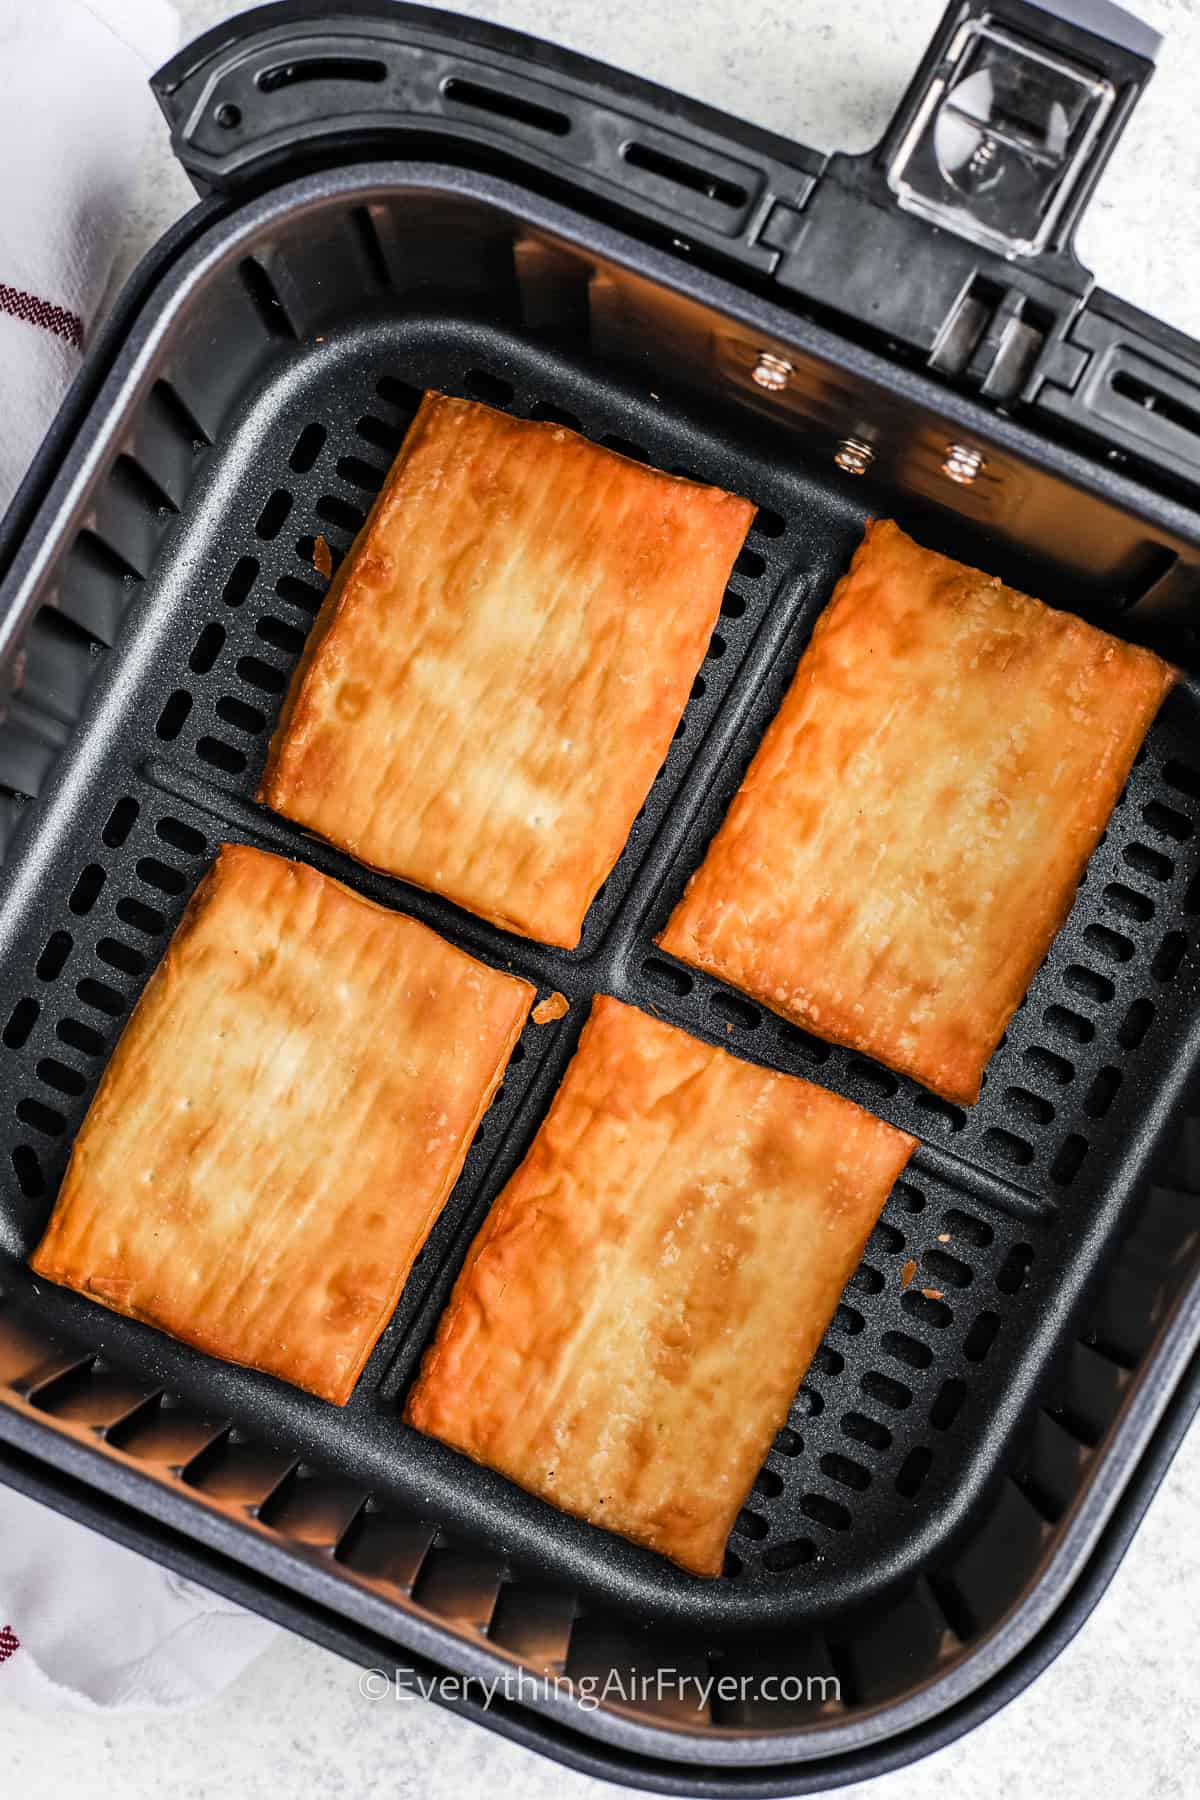 cooked Air Fryer Toaster Strudels in the fryer